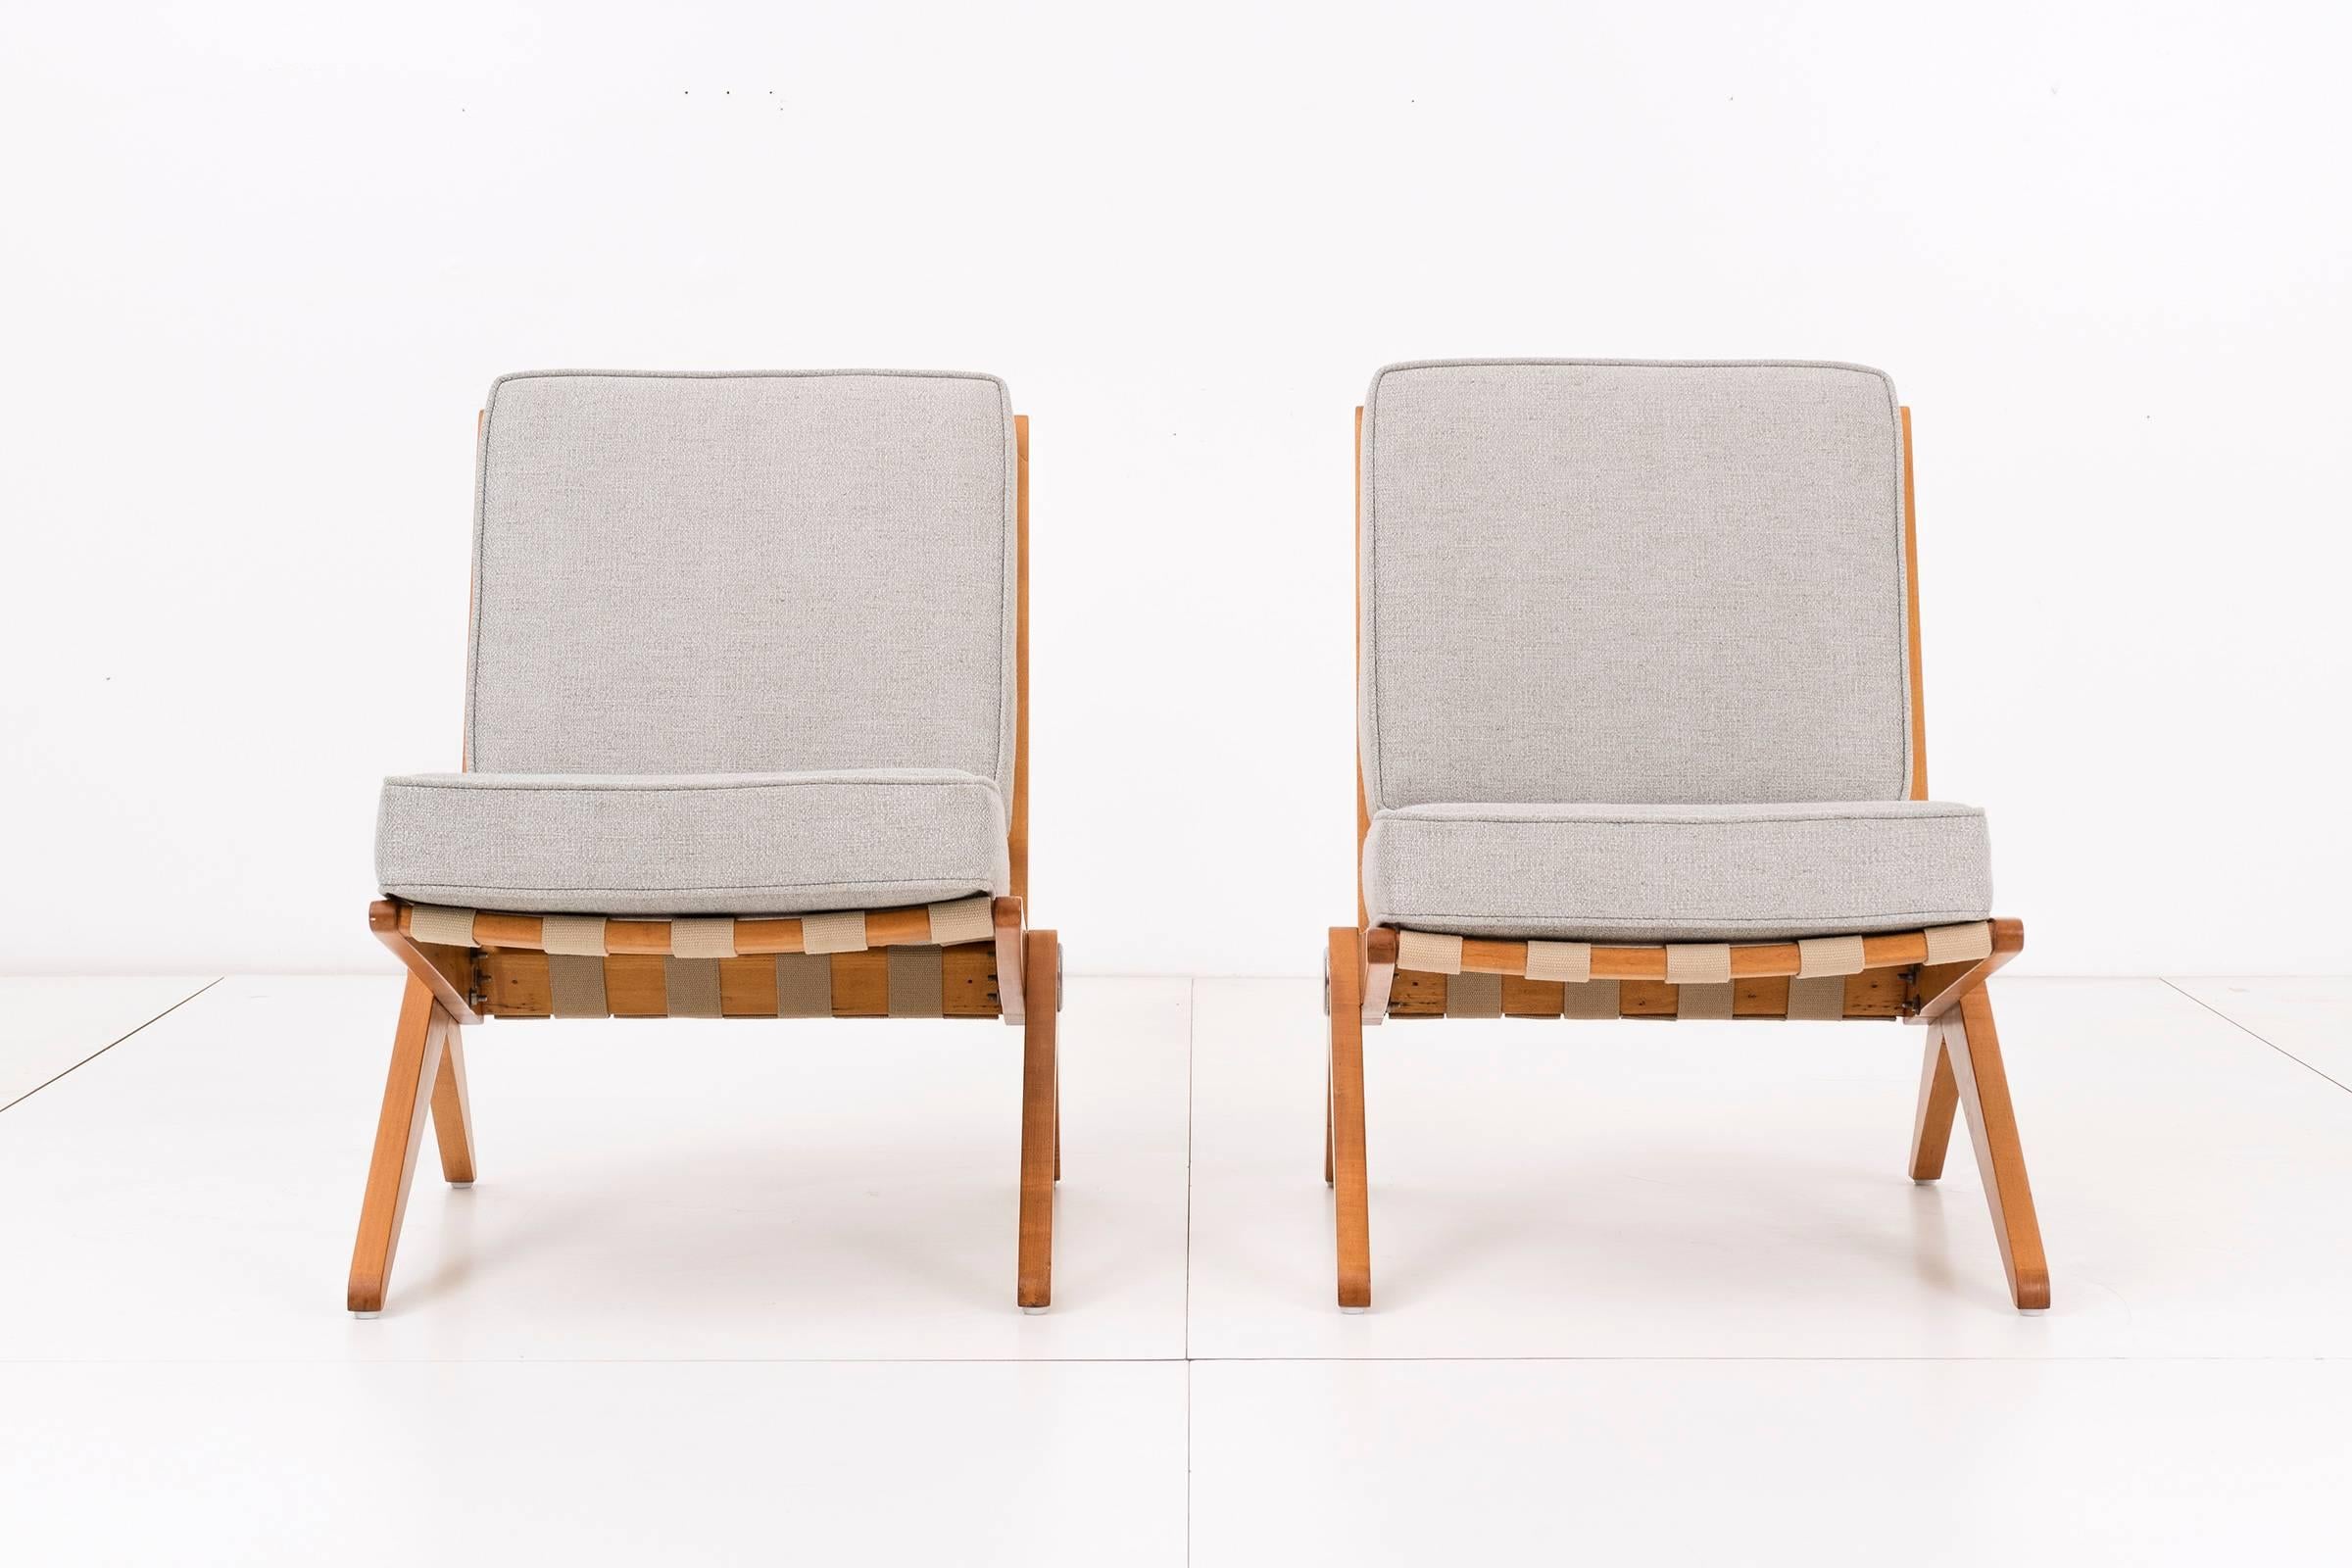 Pierre Jeanneret for Knoll International. Model 92. Solid birch chair frame with linen straps to hold loose cushions in place. Cushions have been reupholstered.